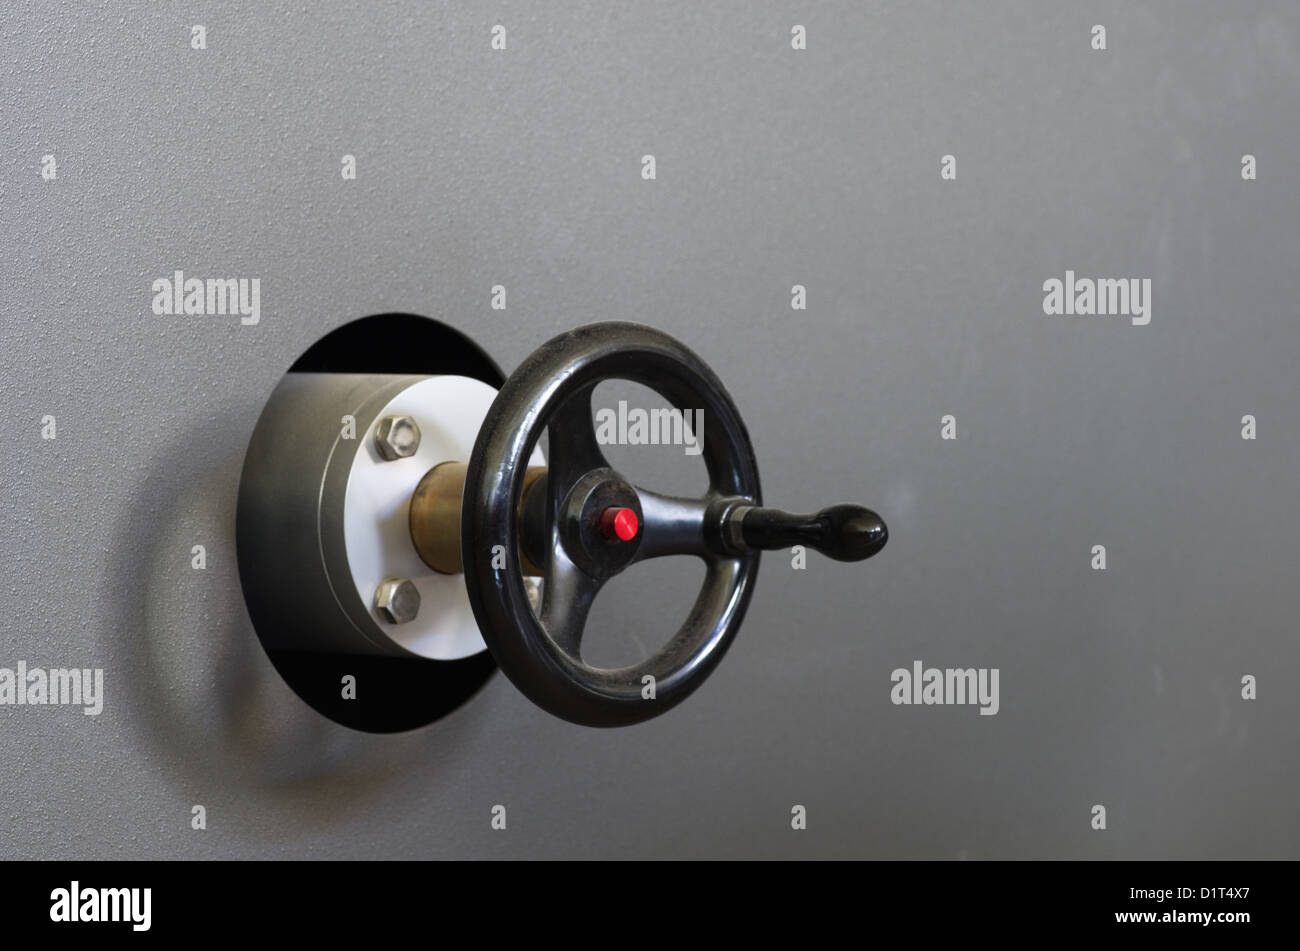 heavy duty industrial crank on a textured gray metal machine Stock Photo